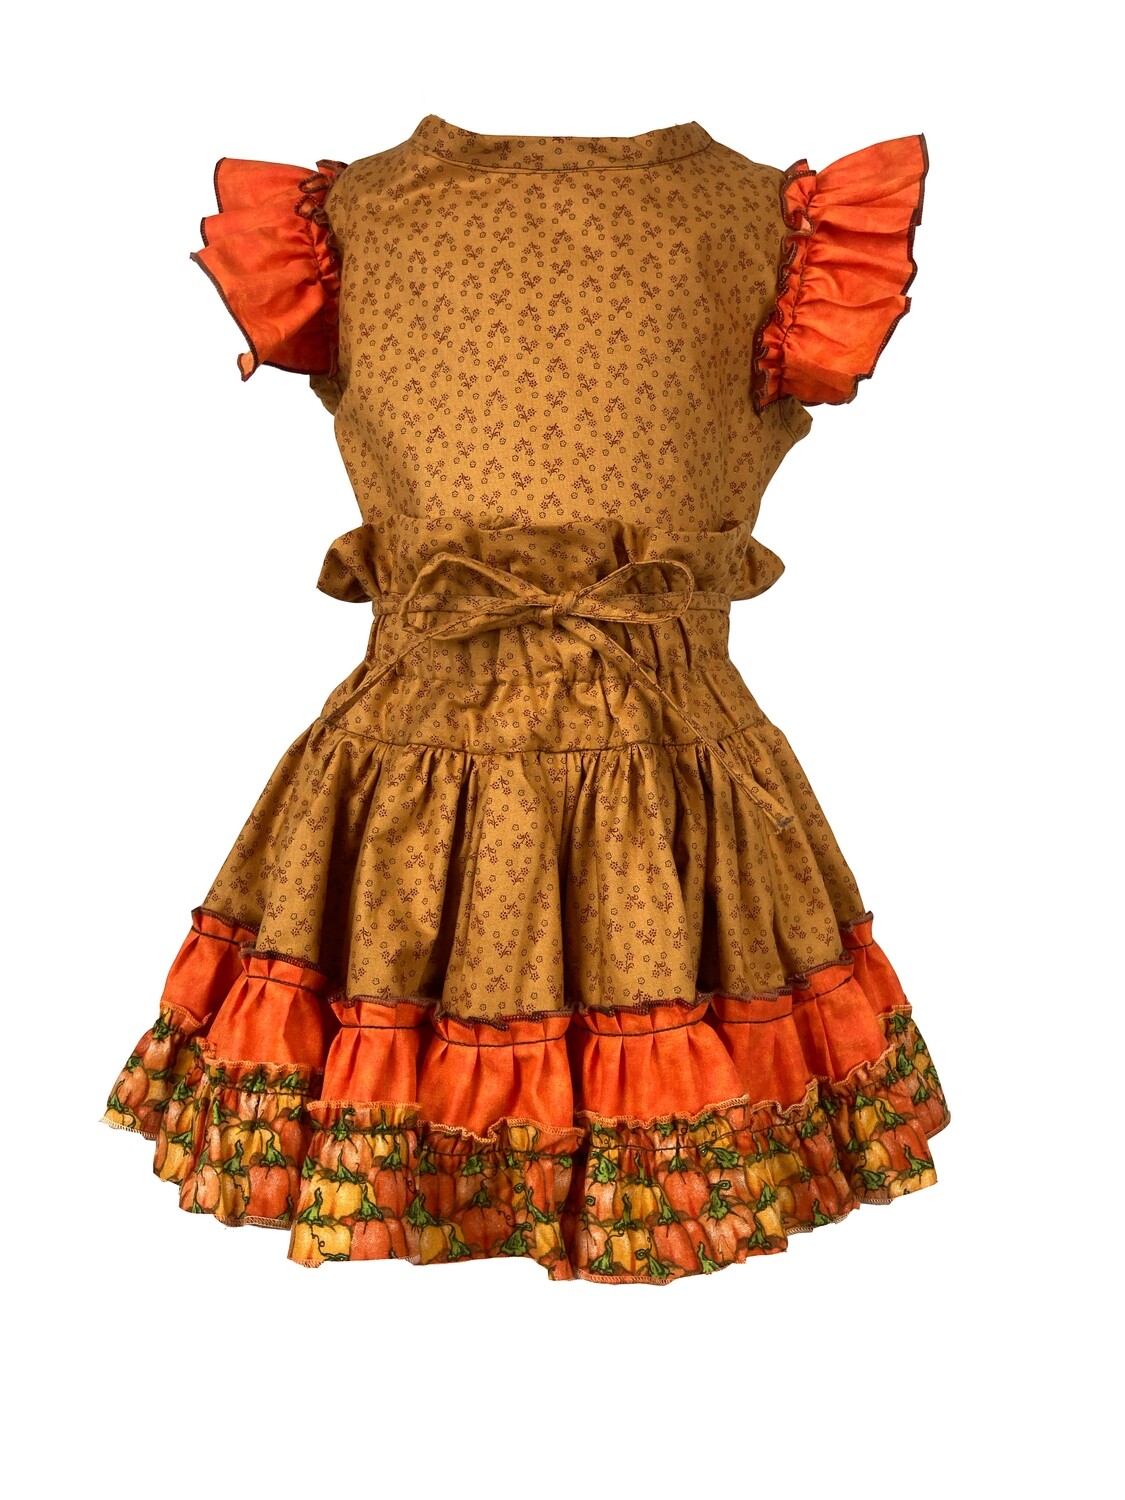 Fall Two Piece Top and Skirt (Orange Sleeves) 3T